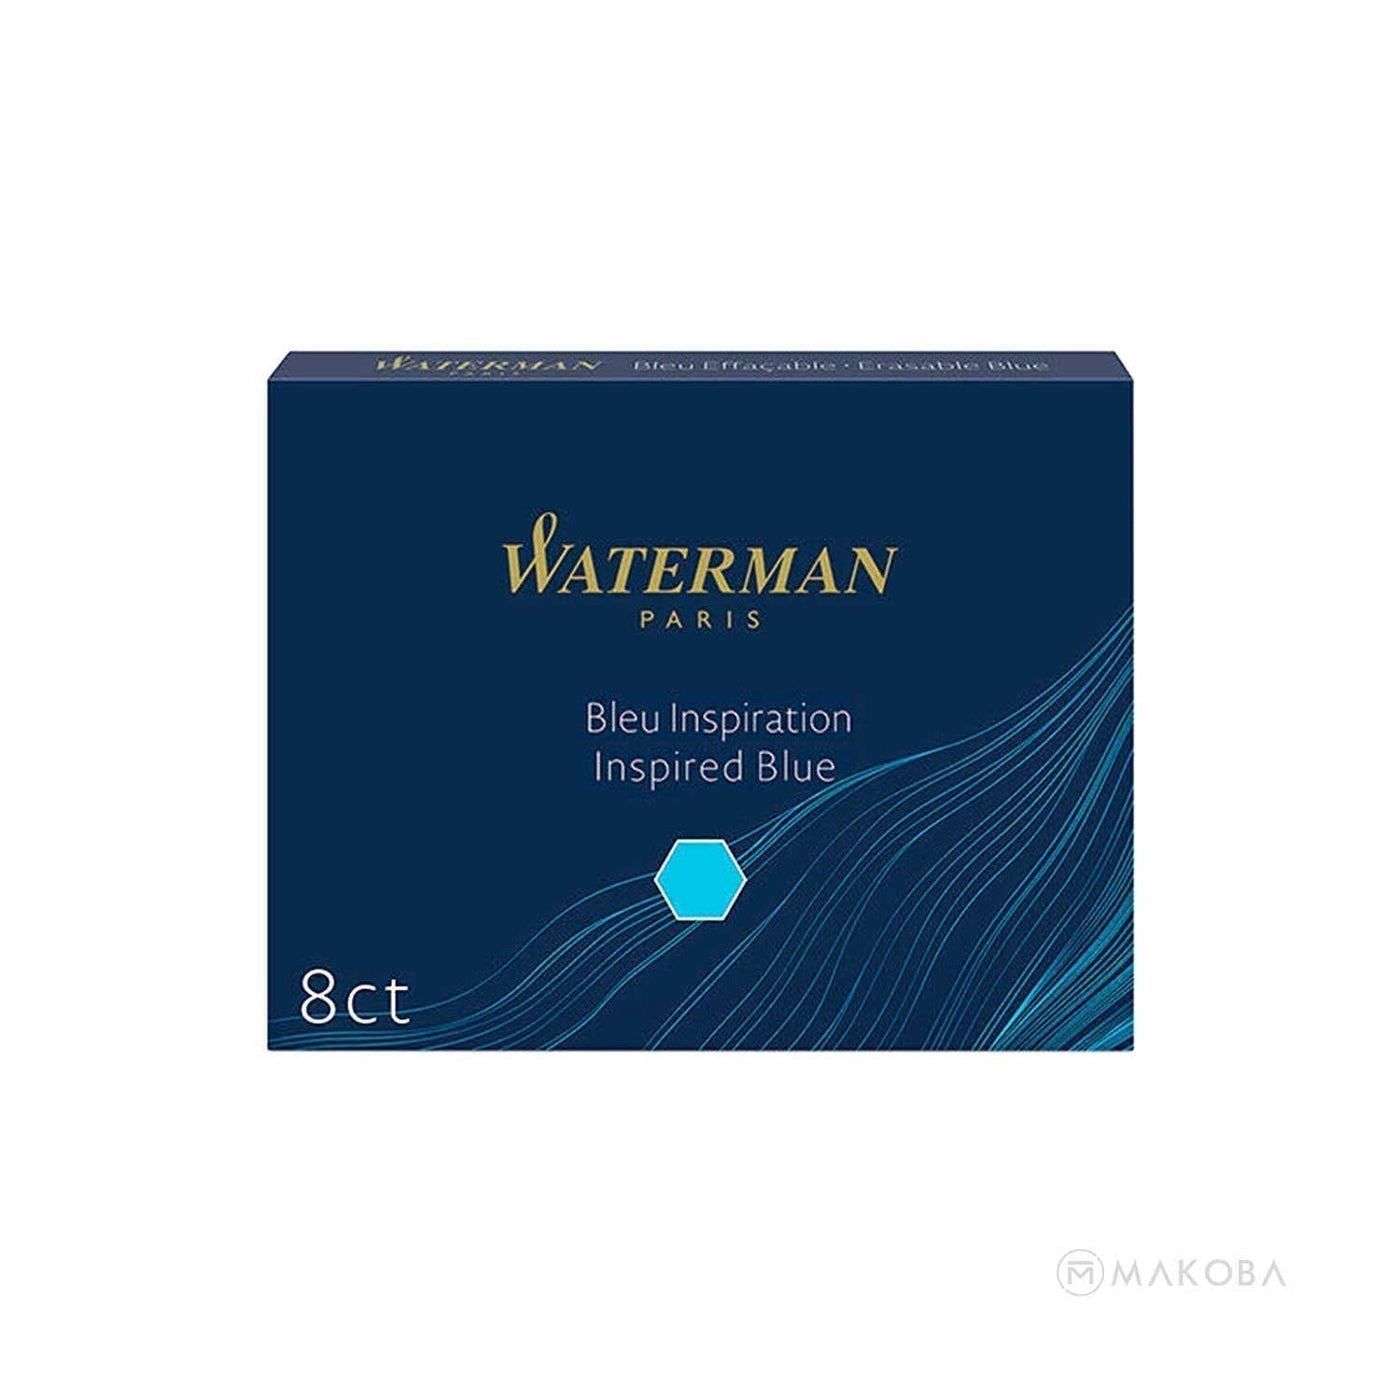 Waterman Long Ink Cartridge Pack of 8 - Inspired Blue (Turquoise)